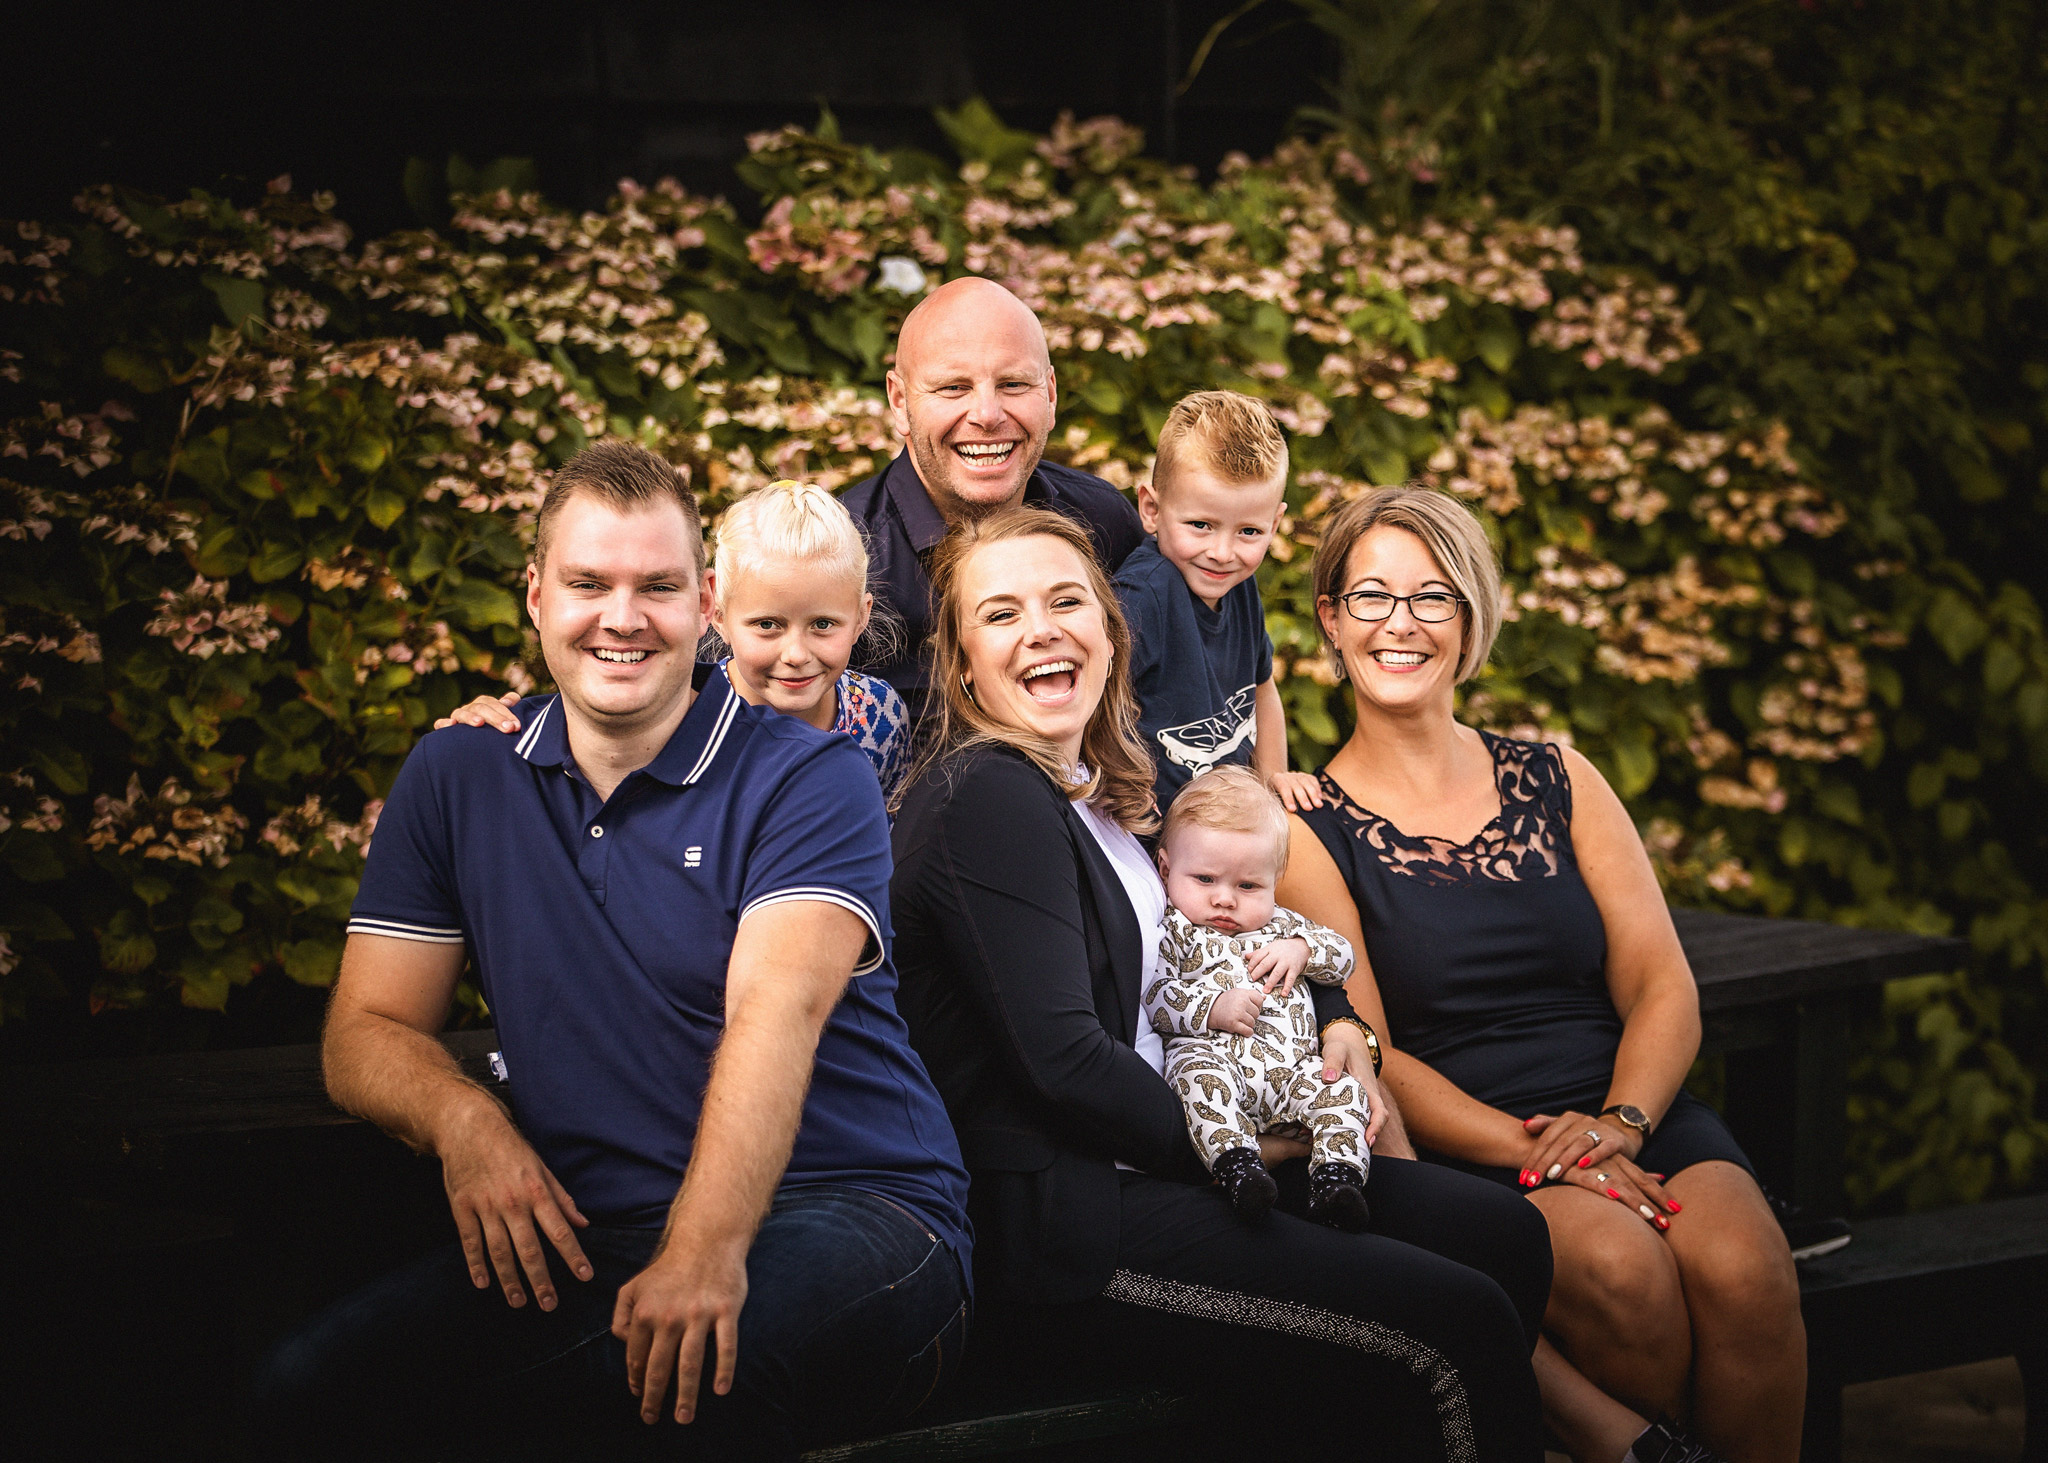 grote Familie fotoshoot Amsterdam